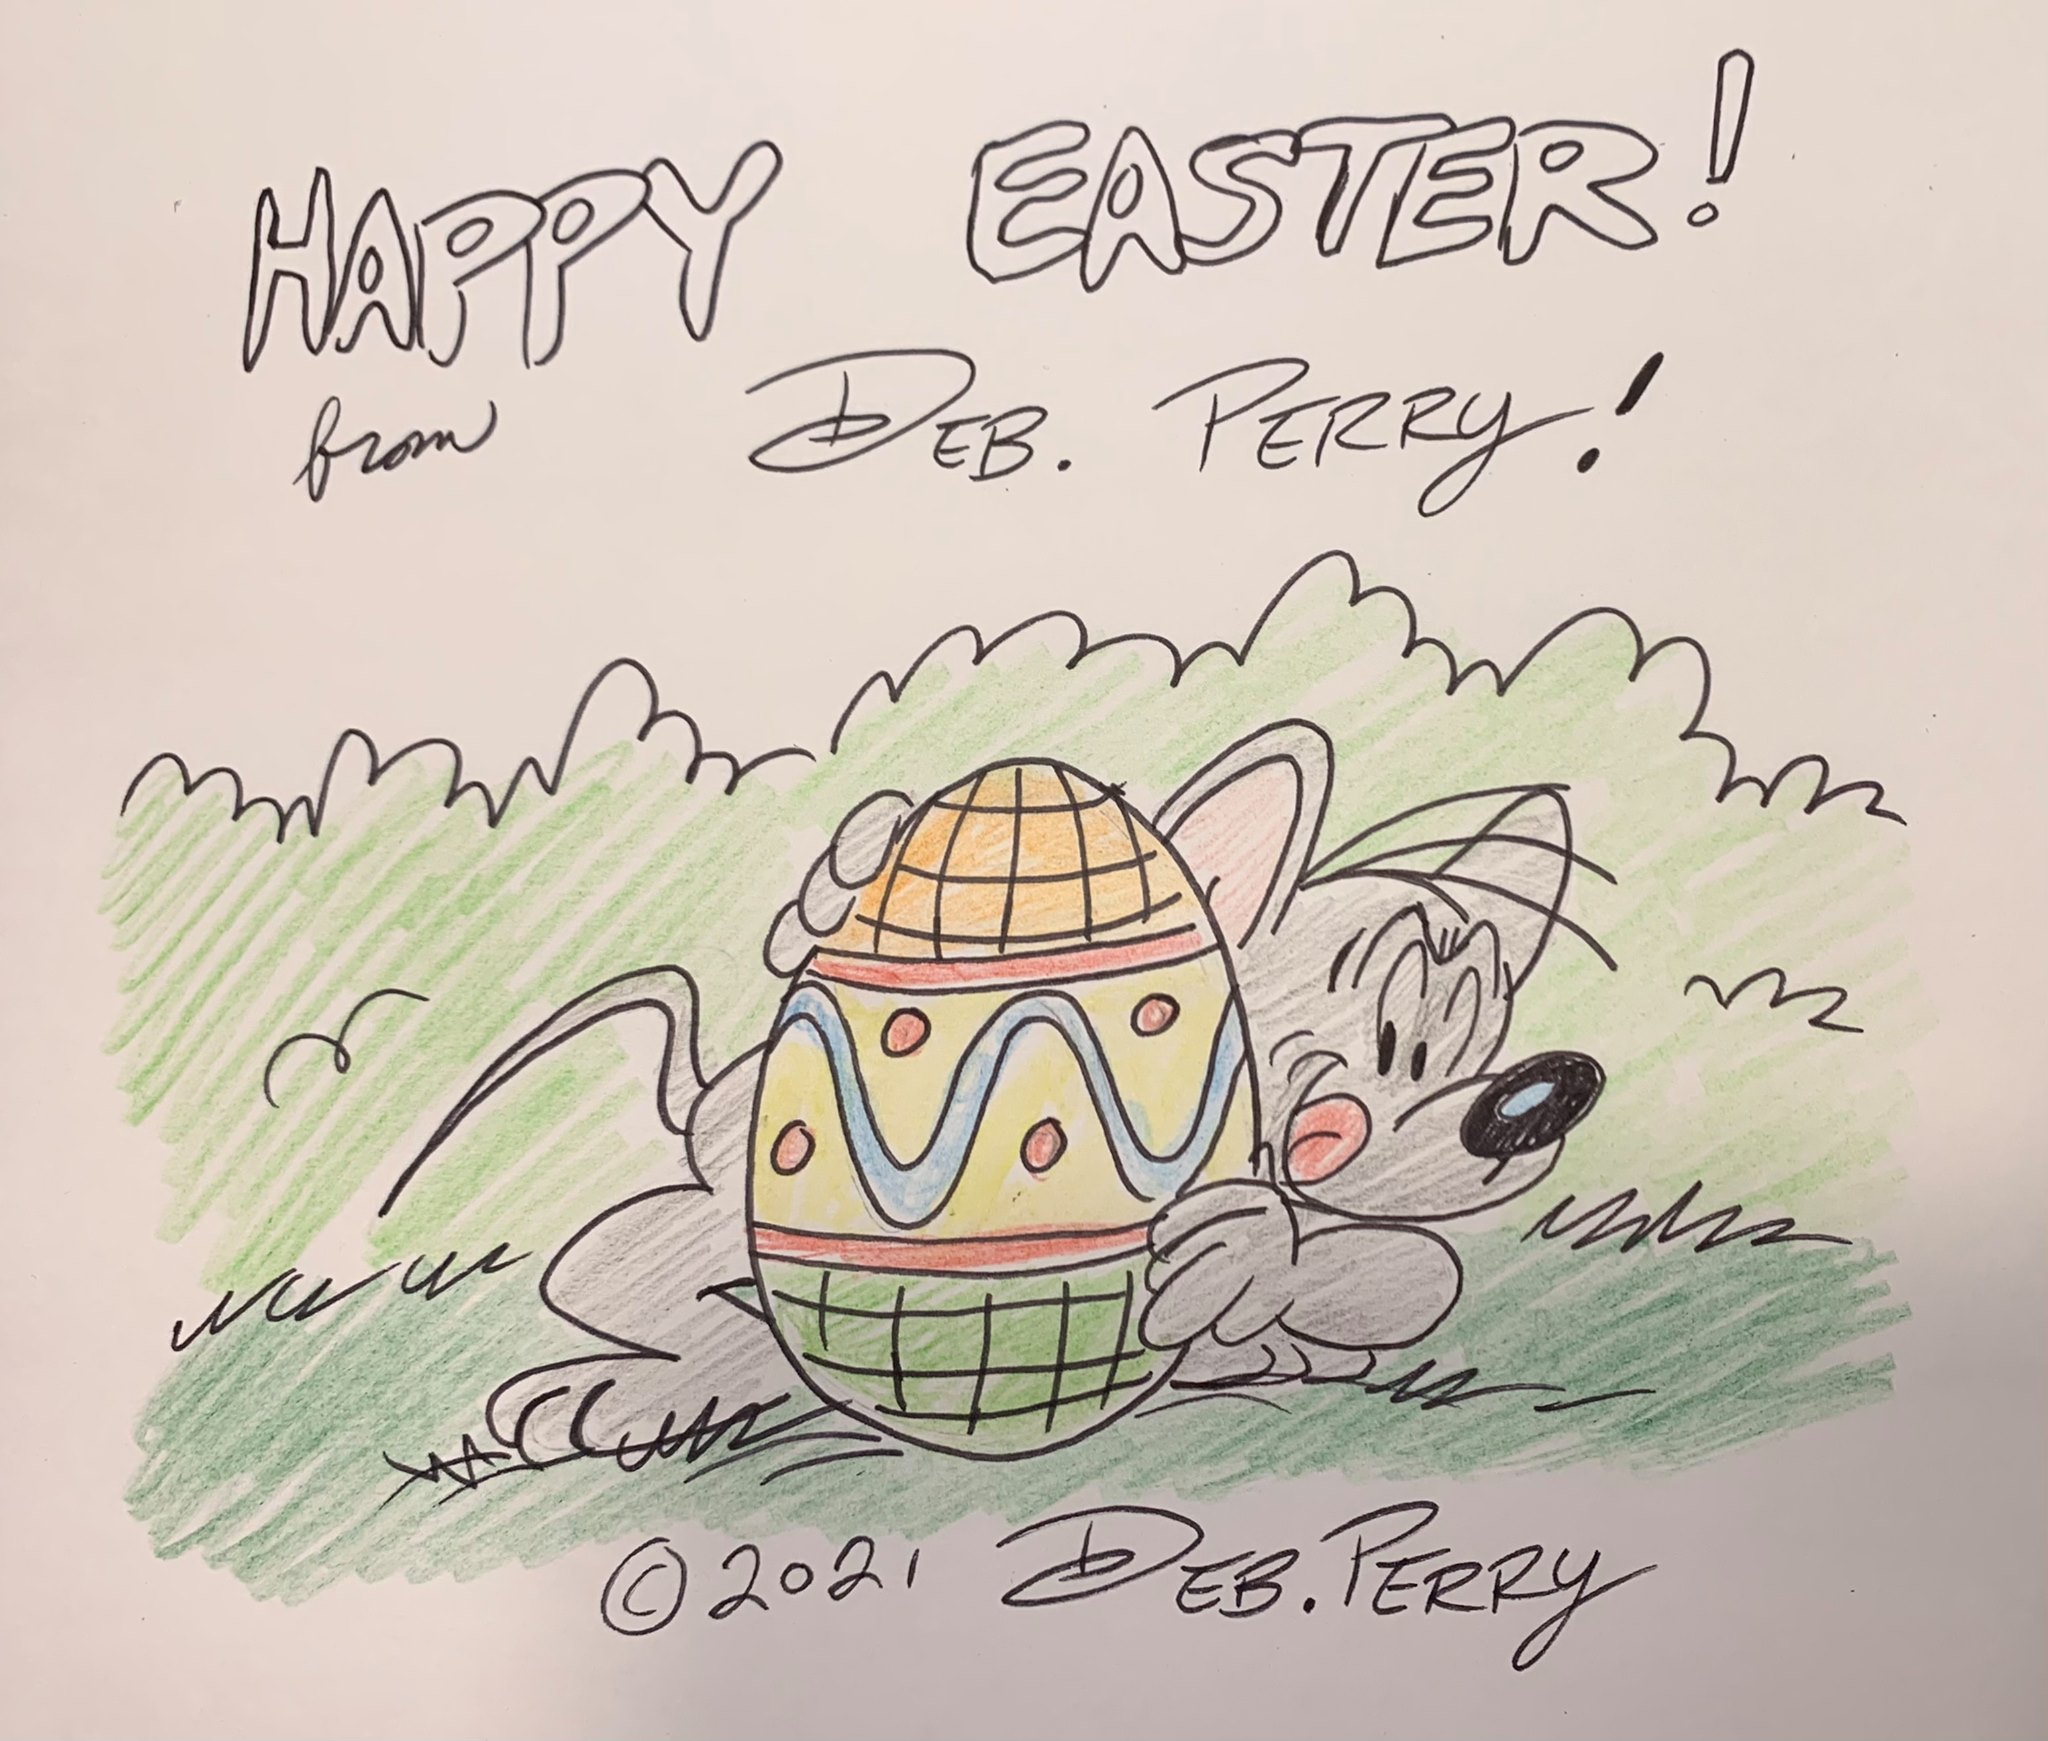 Happy Easter from Fluffy and Mervin!
